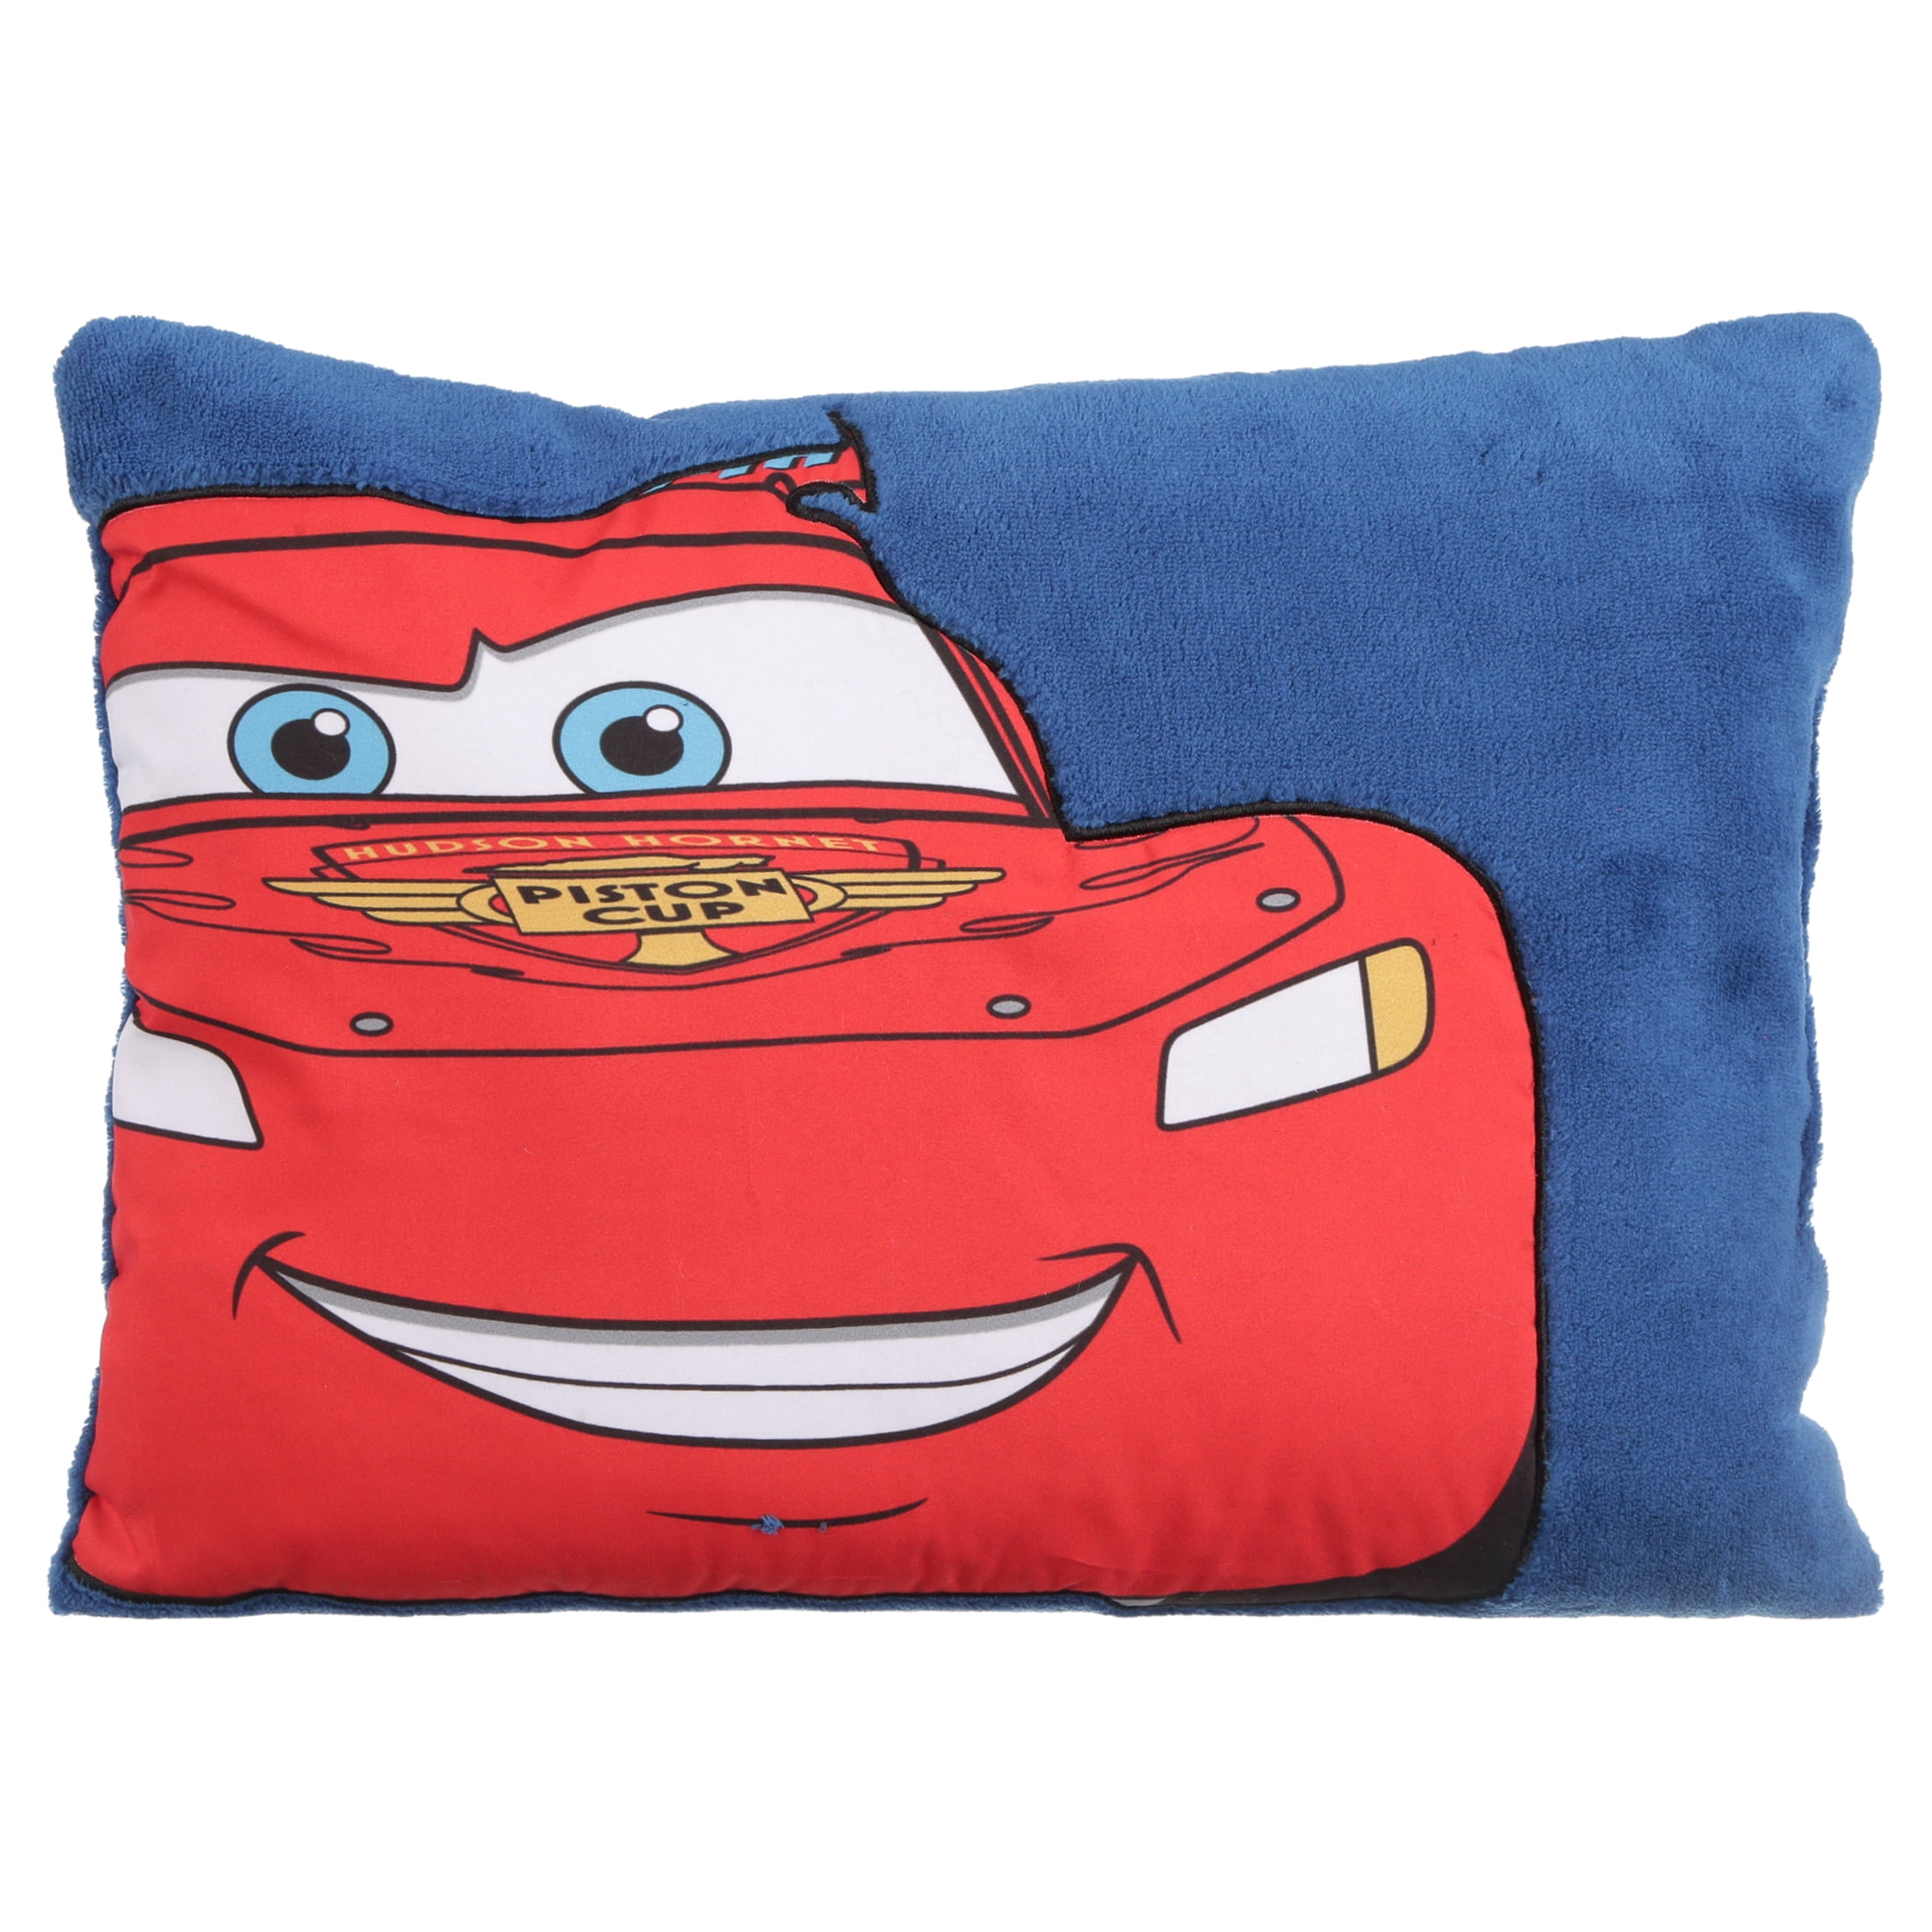 Disney Cars Toddler Pillow, Blue and Red 